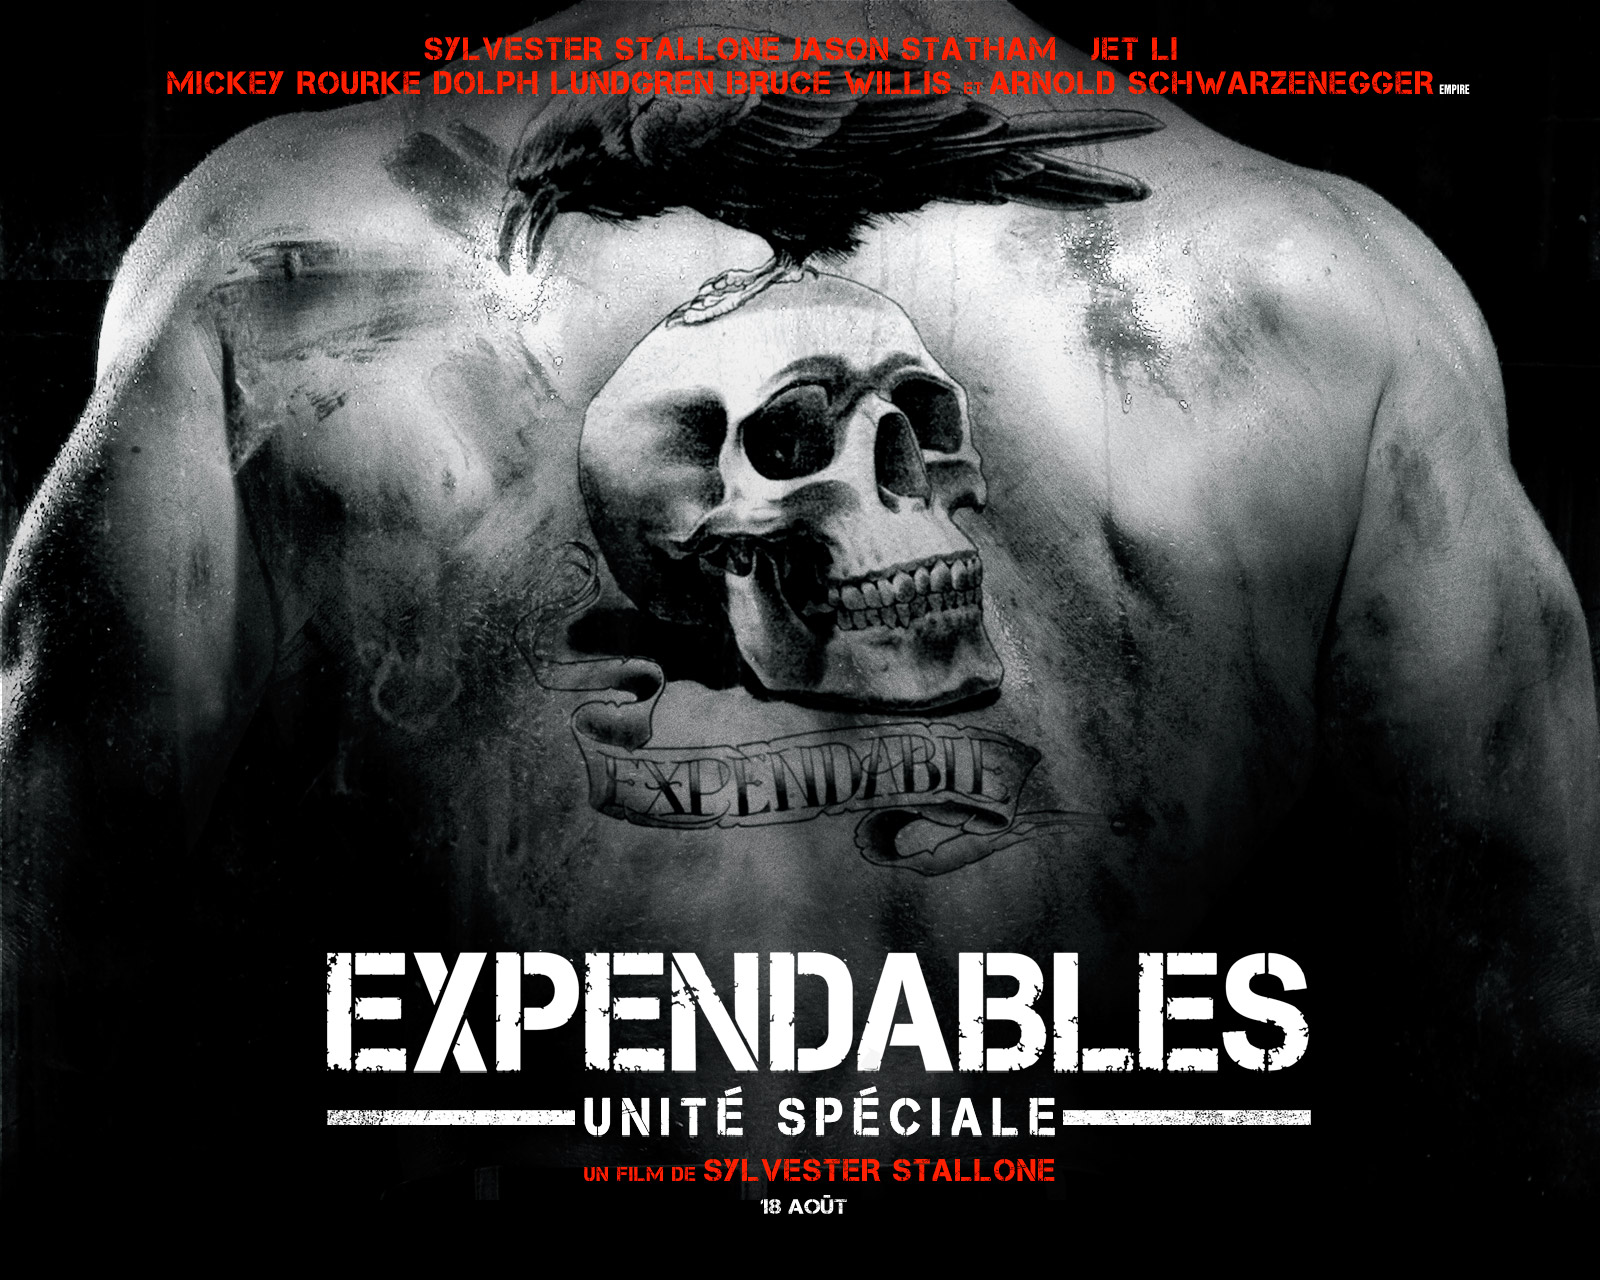 Expendables_04_1600x1280.jpg